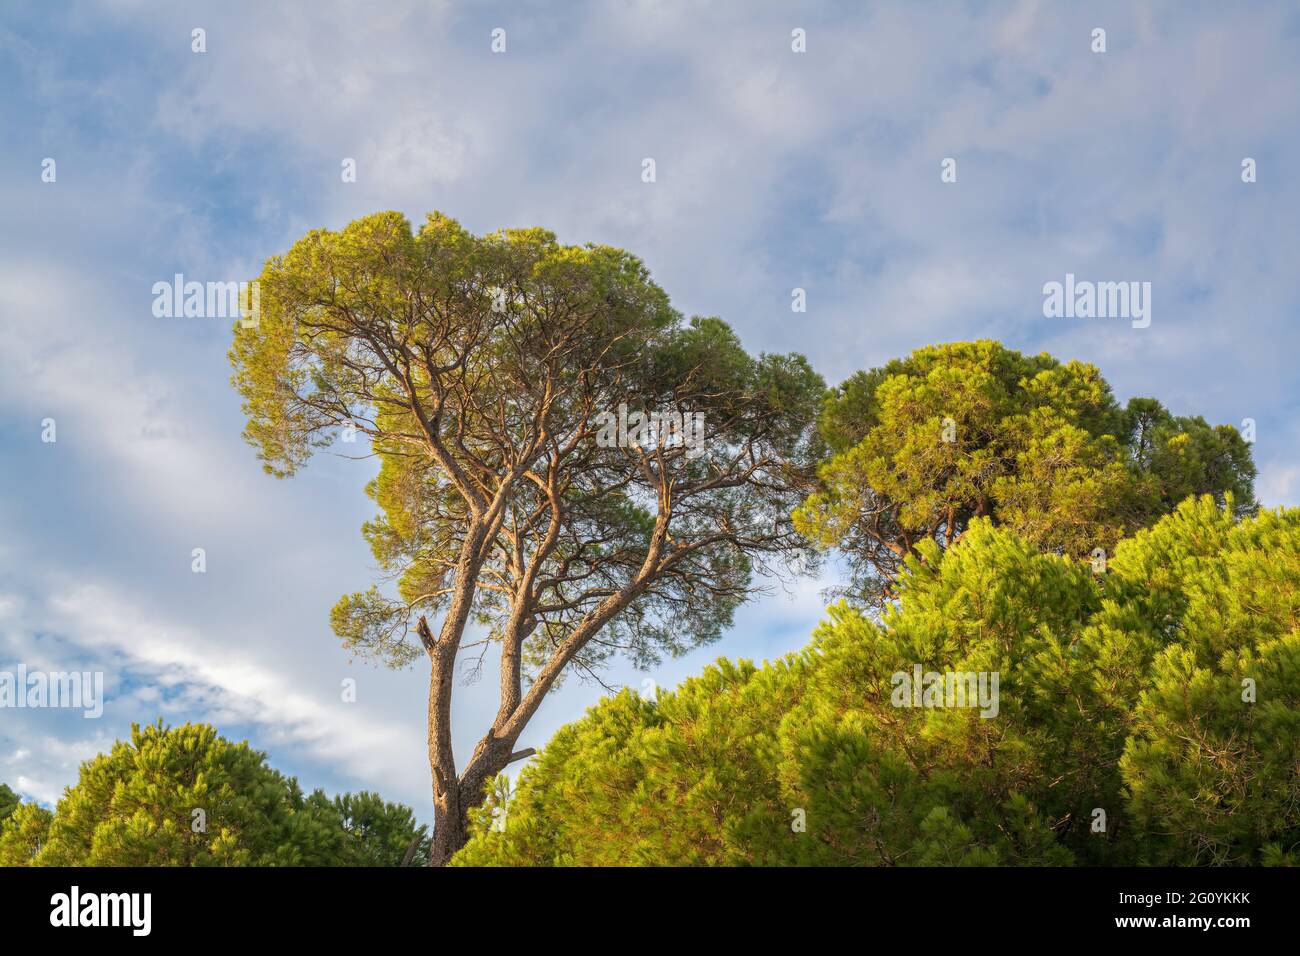 Stone pine in the forest in a bright day, south coast of Turkey in Mediterranean. Pinus pinea also know as umbrella pine or parasol pine cultivated fo Stock Photo